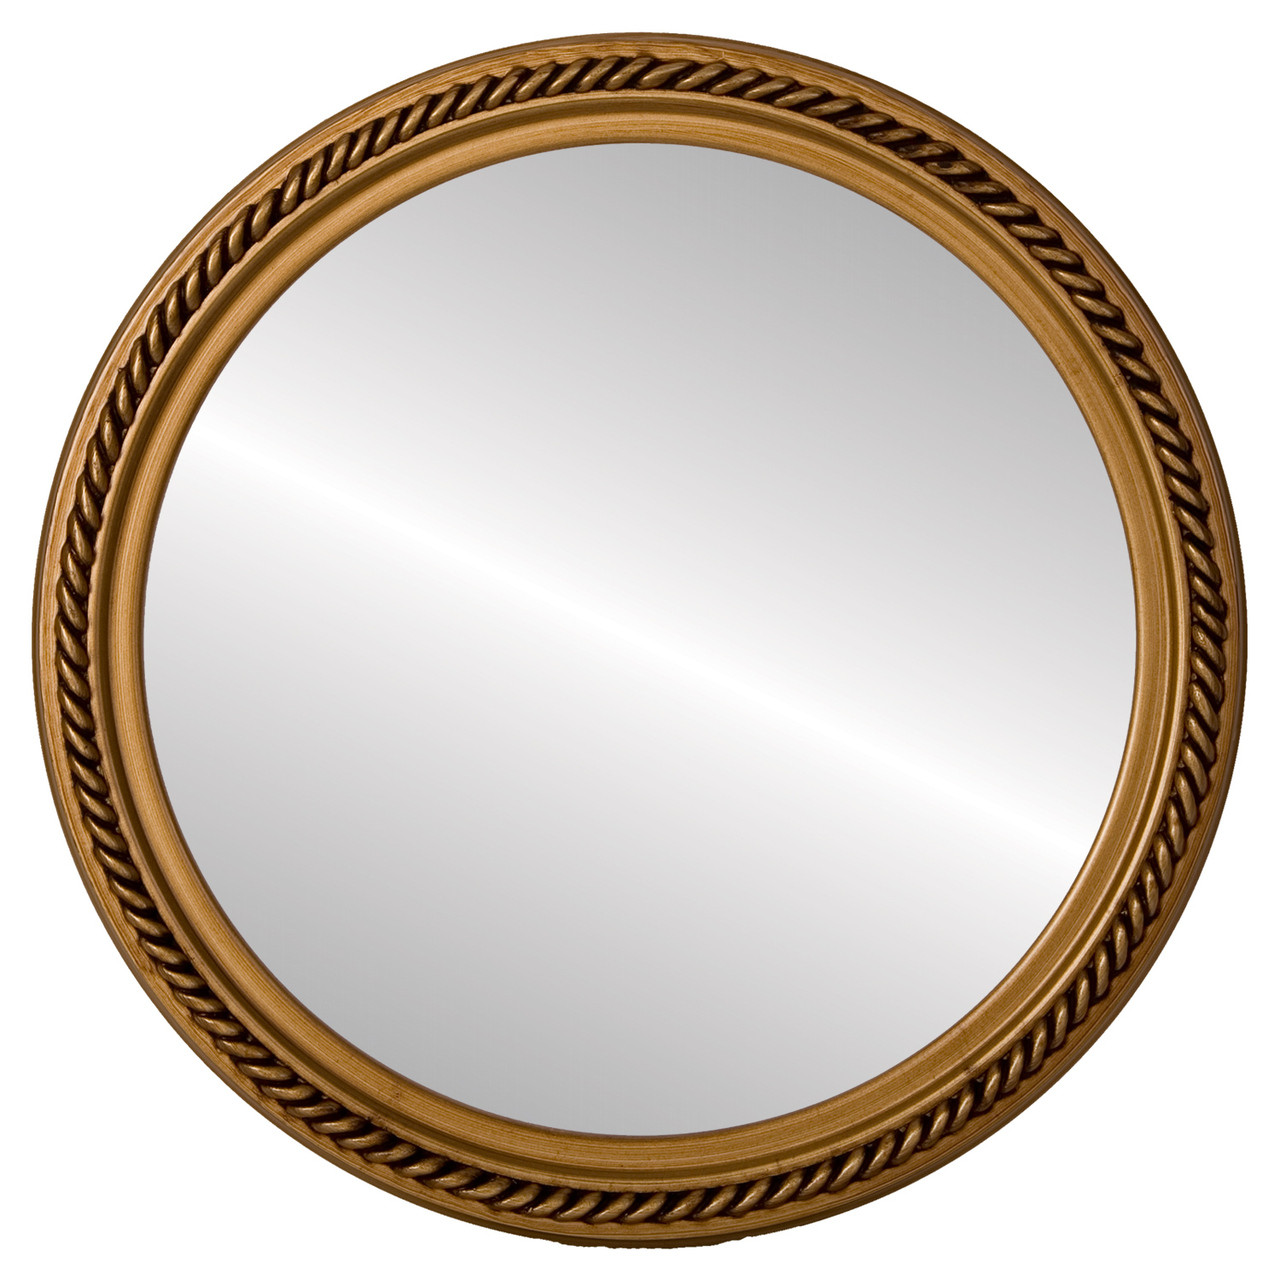 Antique Gold Round Mirrors from $136 Free Shipping